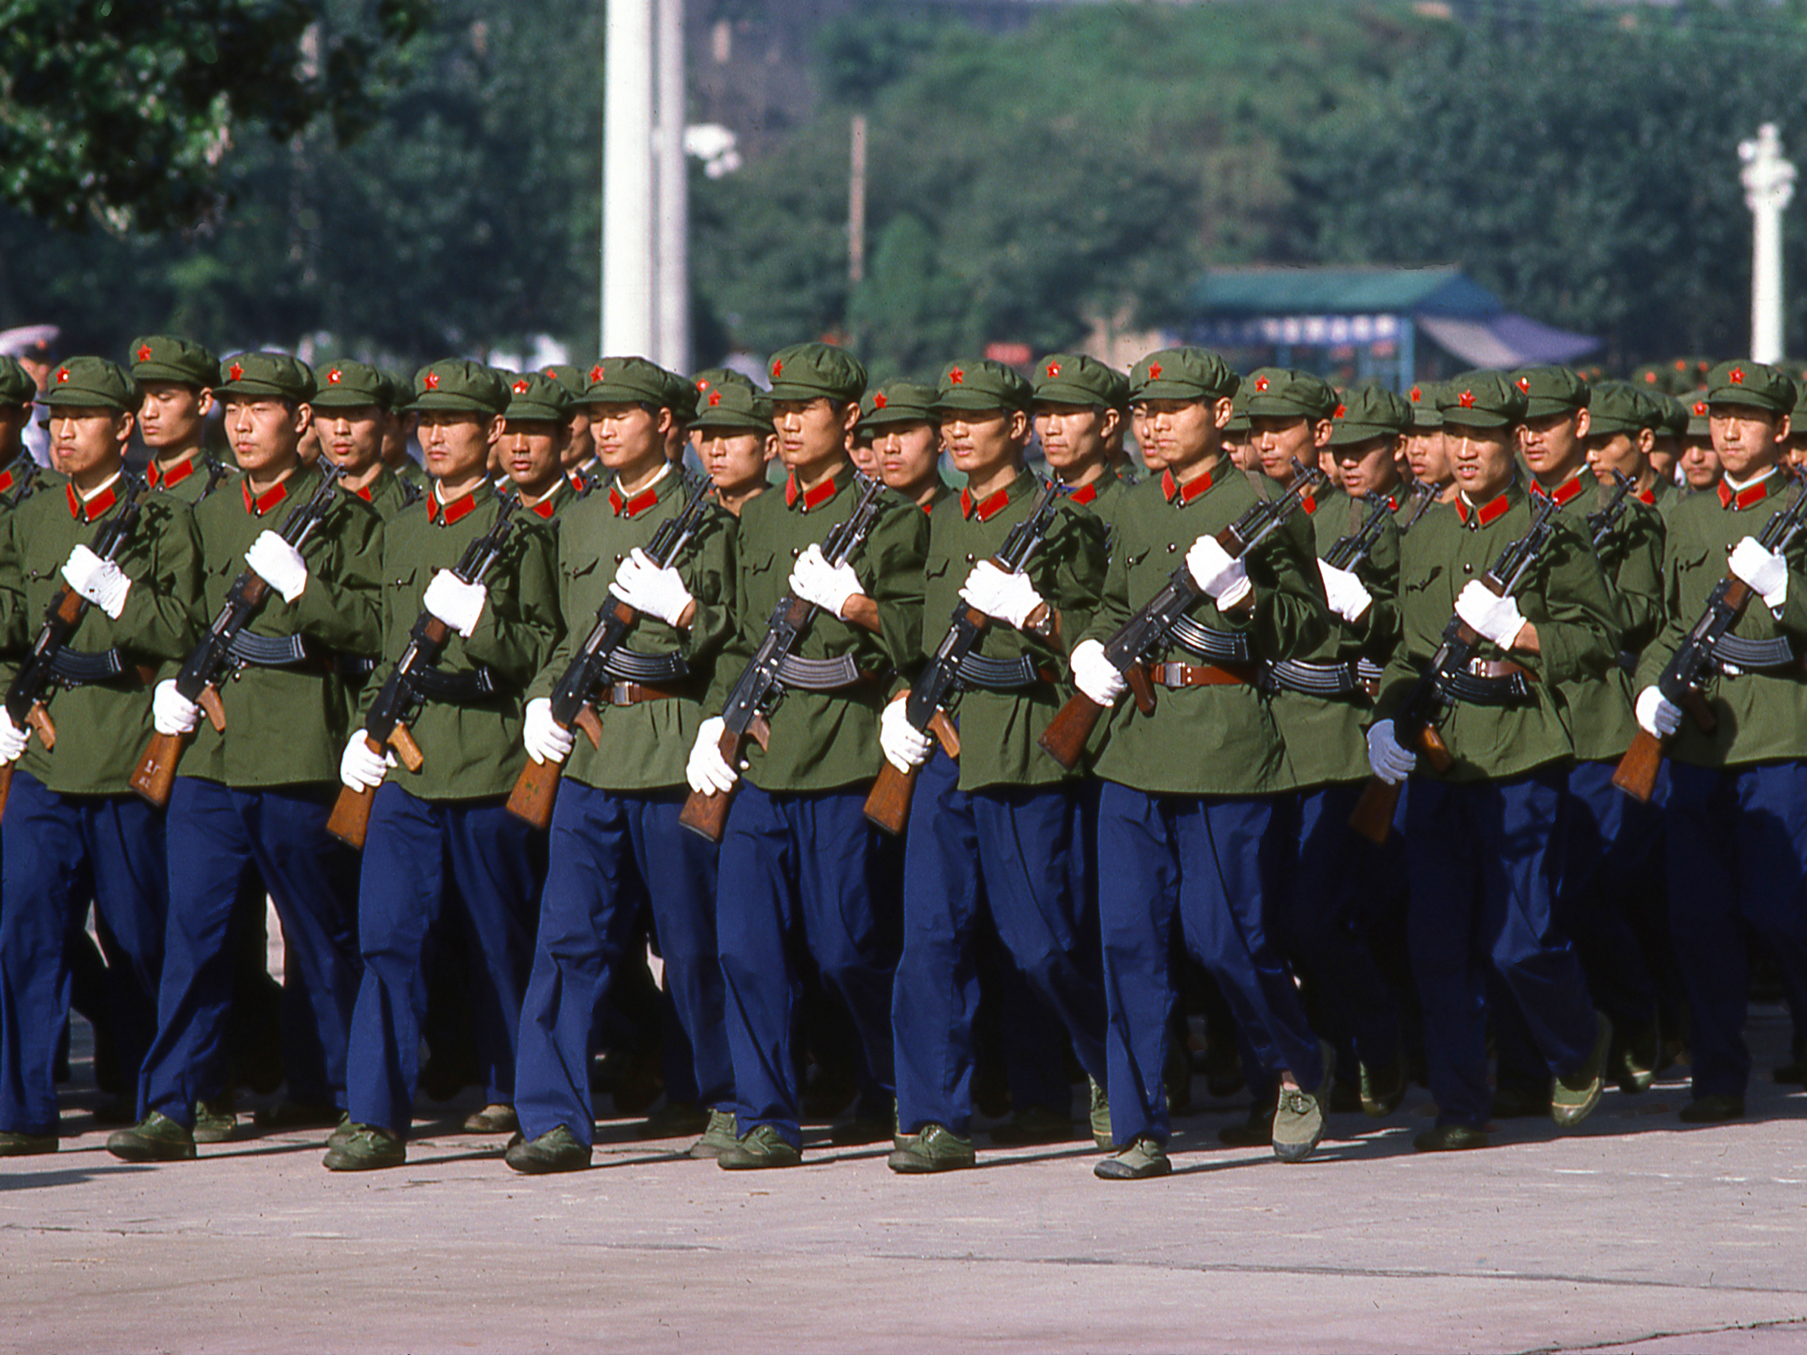 A photo showing Chinese People's Liberation Army soldiers carrying rifles and marching down a street in Xian, China, circa 1979.